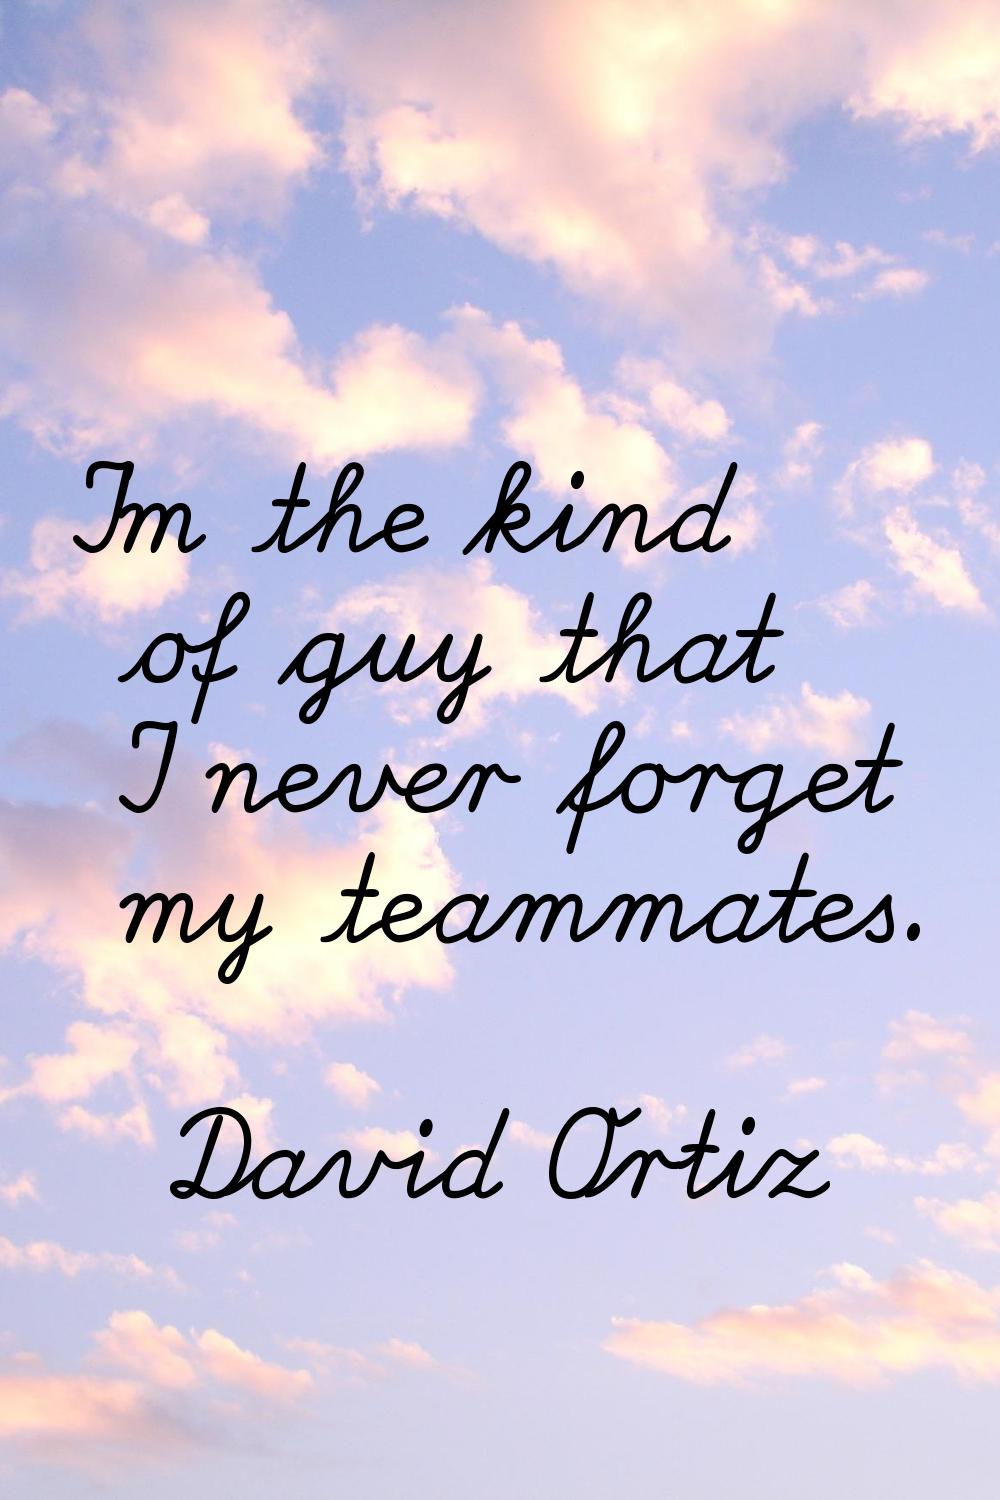 I'm the kind of guy that I never forget my teammates.